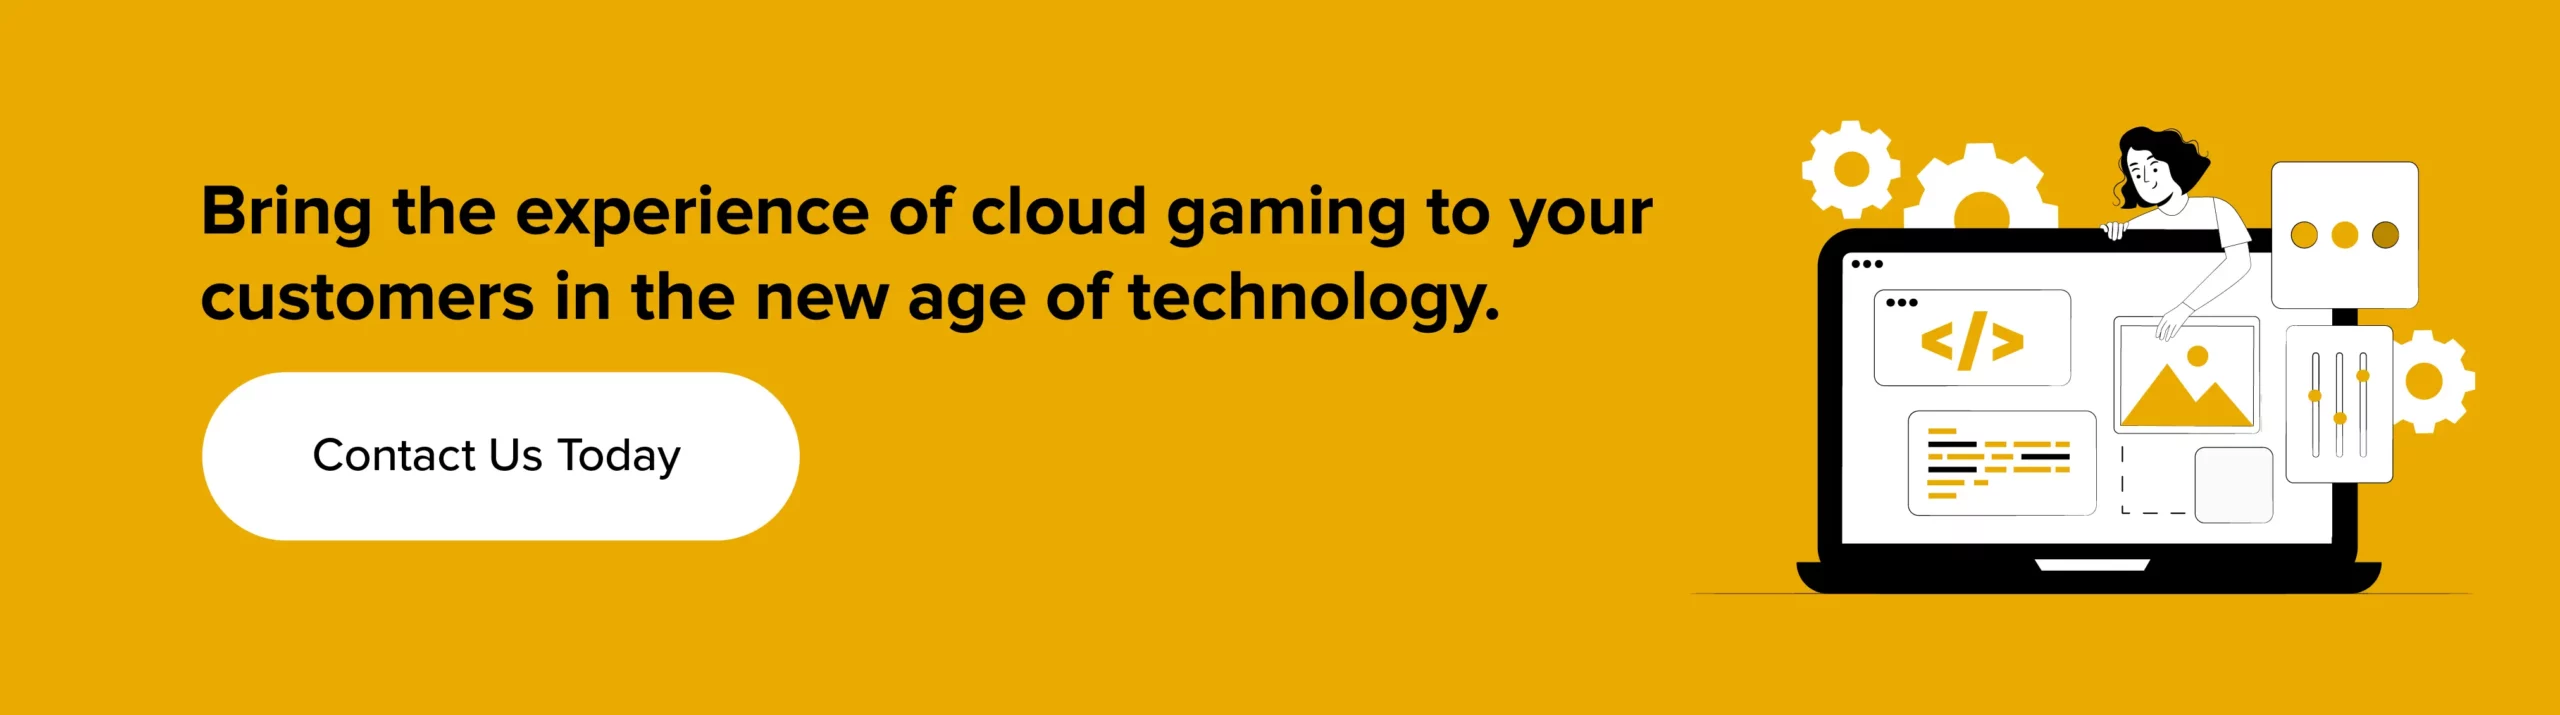 Bring the experience of cloud gaming to your customers